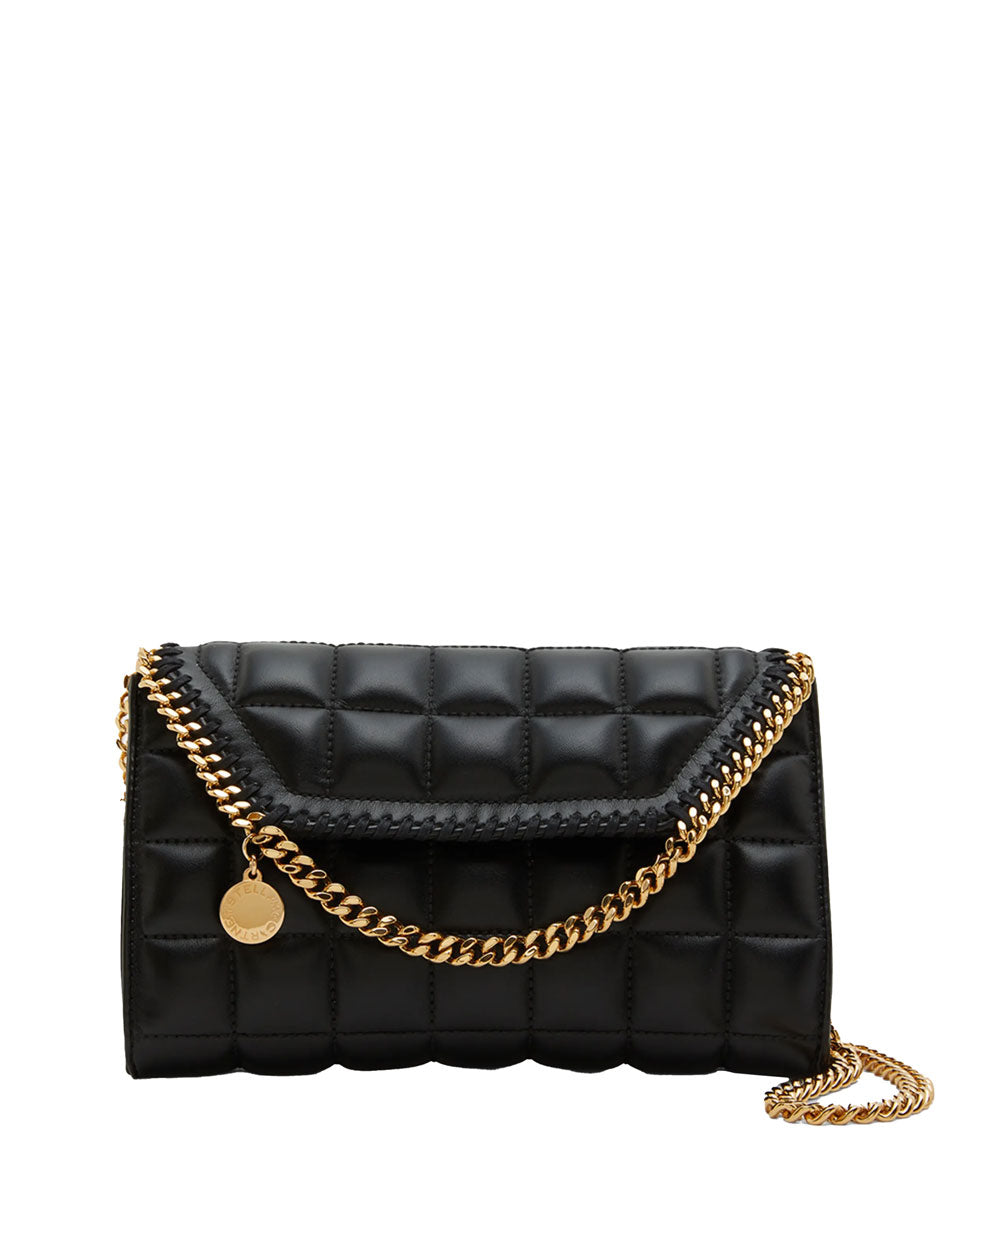 The Look for Less: “Stella McCartney's Falabella Tote Bag” | 